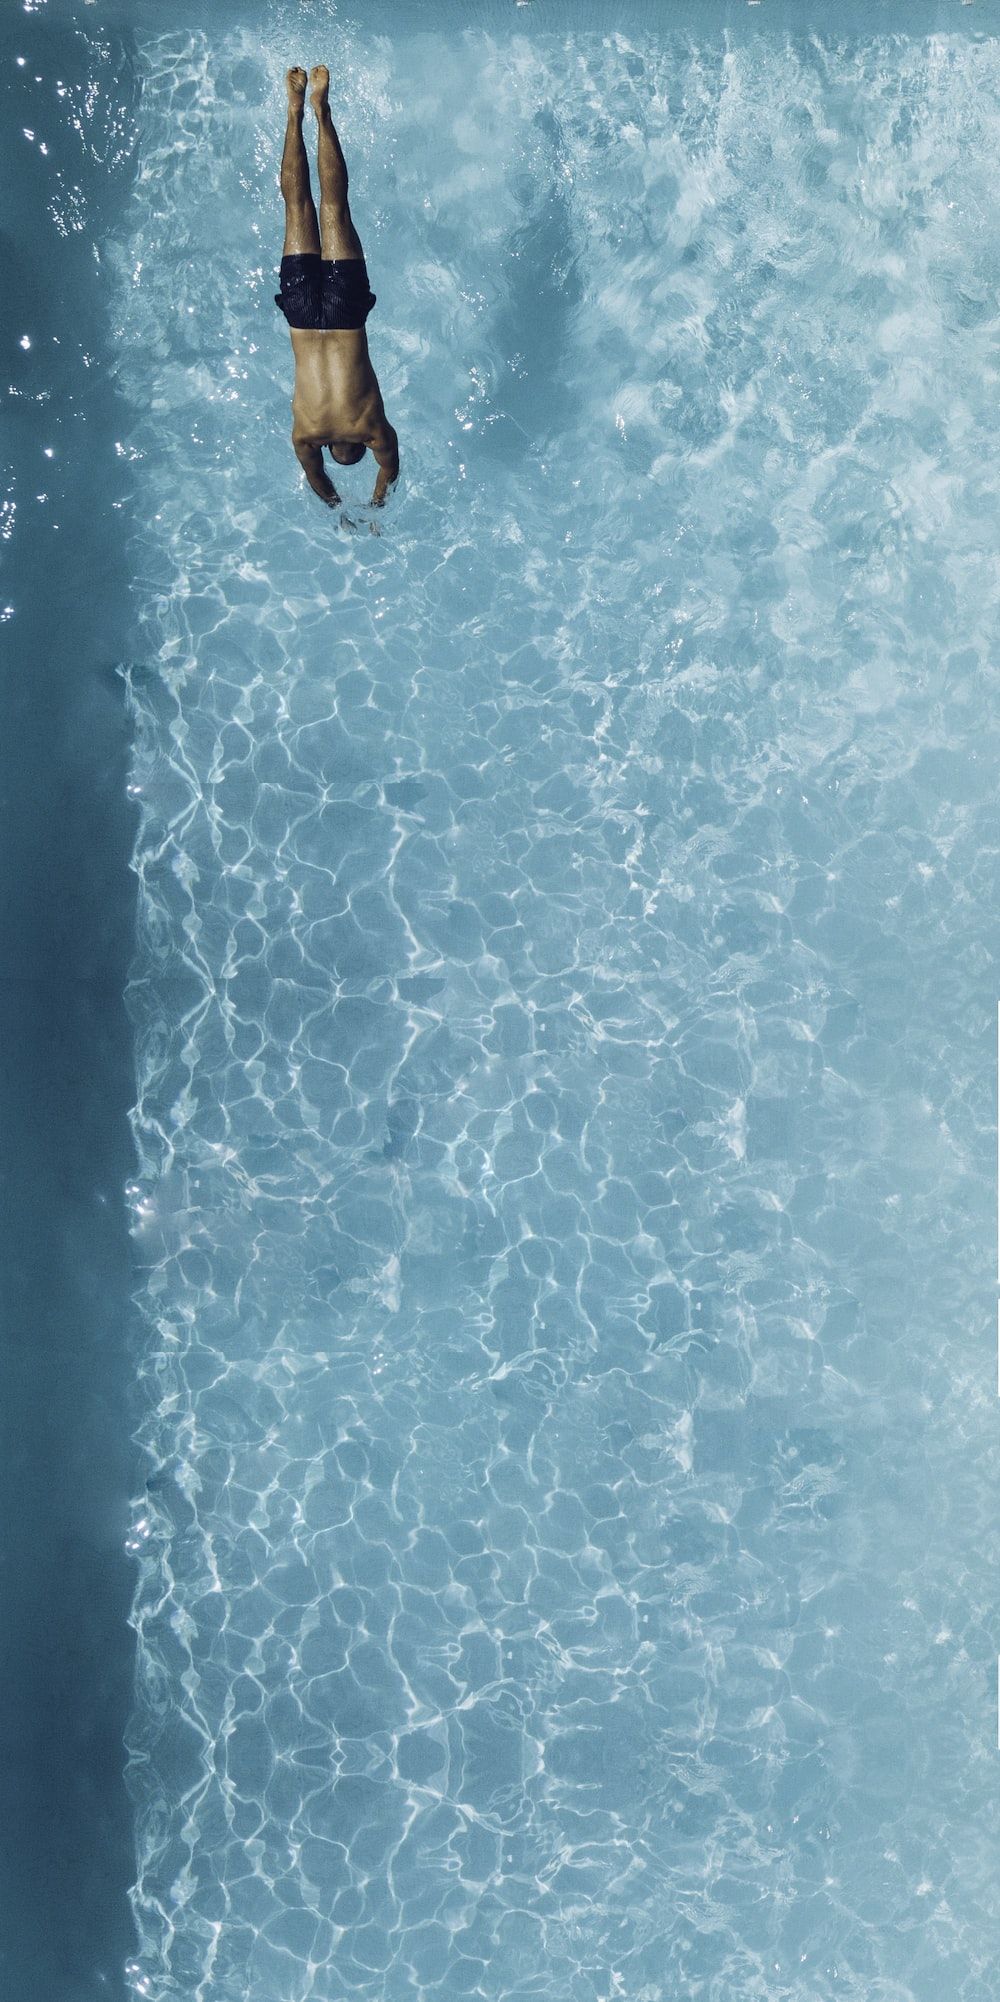 A man in a black swimming trunks diving in a pool - Swimming pool